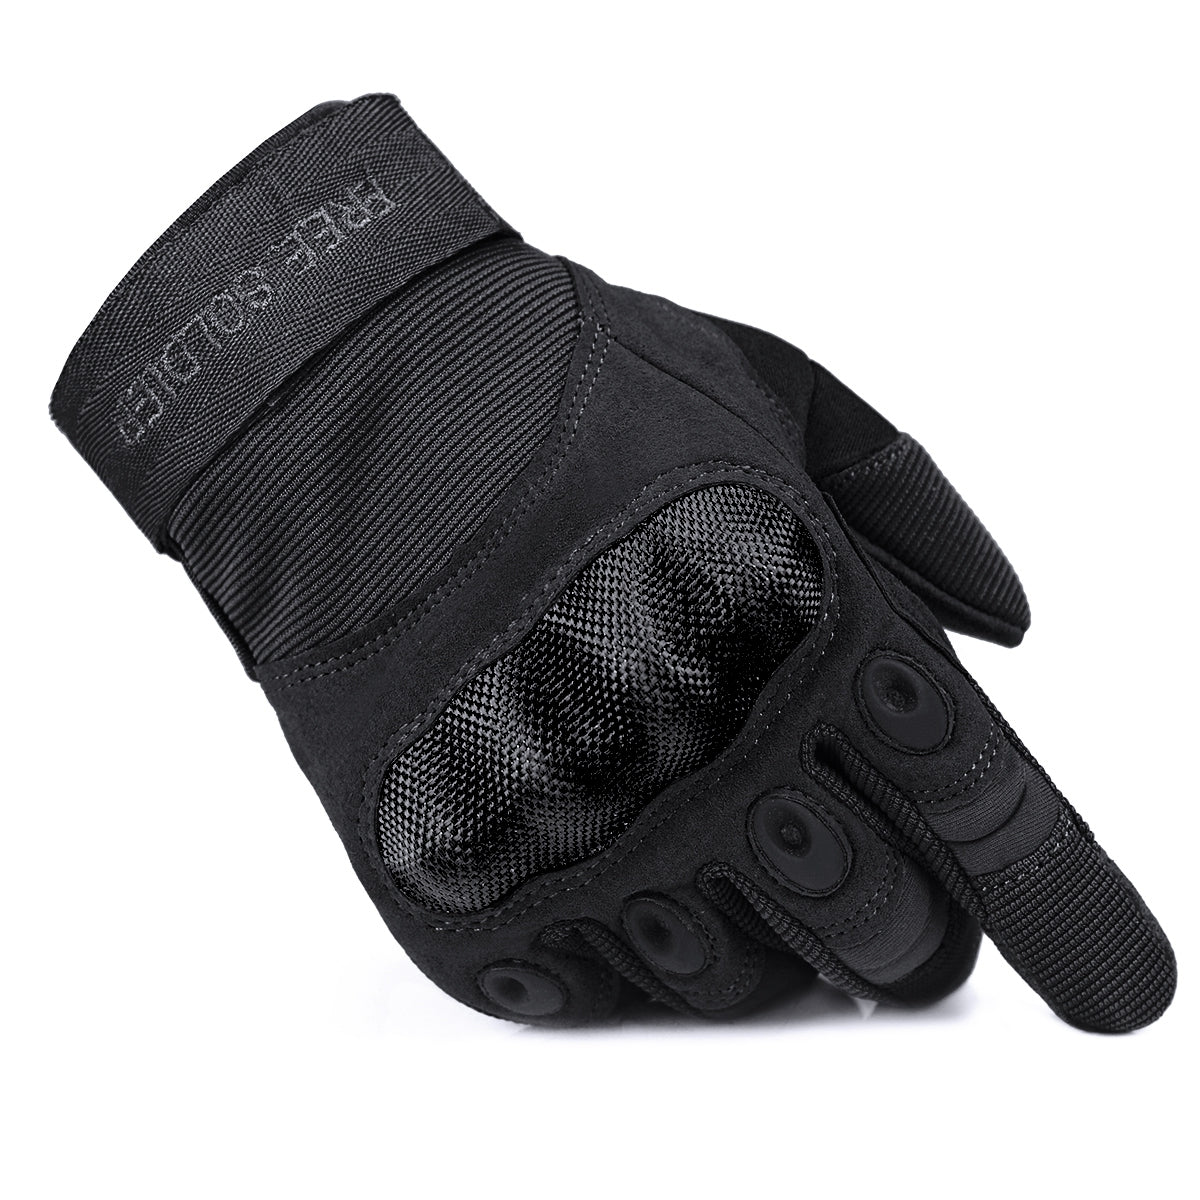 Summer Men Tactical Gloves Hunting Black Full Finger Glove Army Military  Bicycle Mitten Camo Airsoft Hiking Climbing Shooting